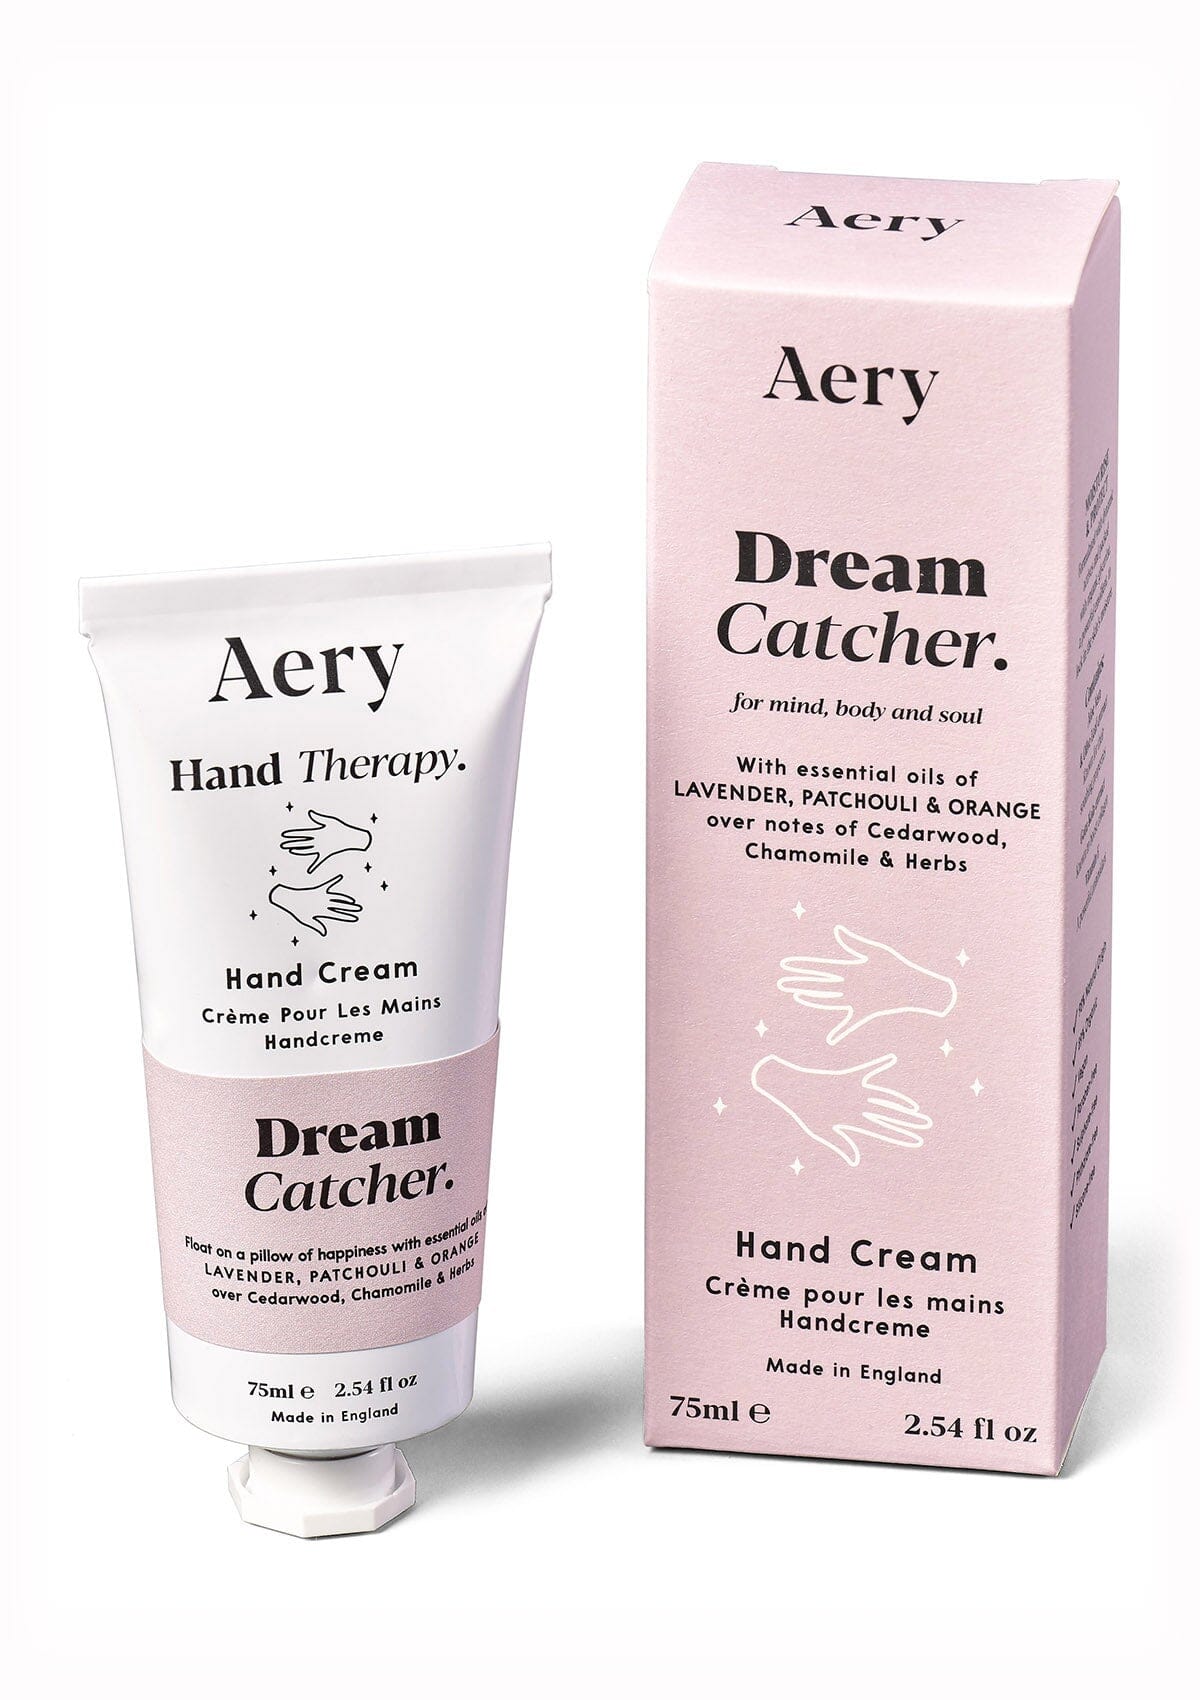 Lilac Dream Catcher hand cream by Aery displayed next to product packaging on white background 